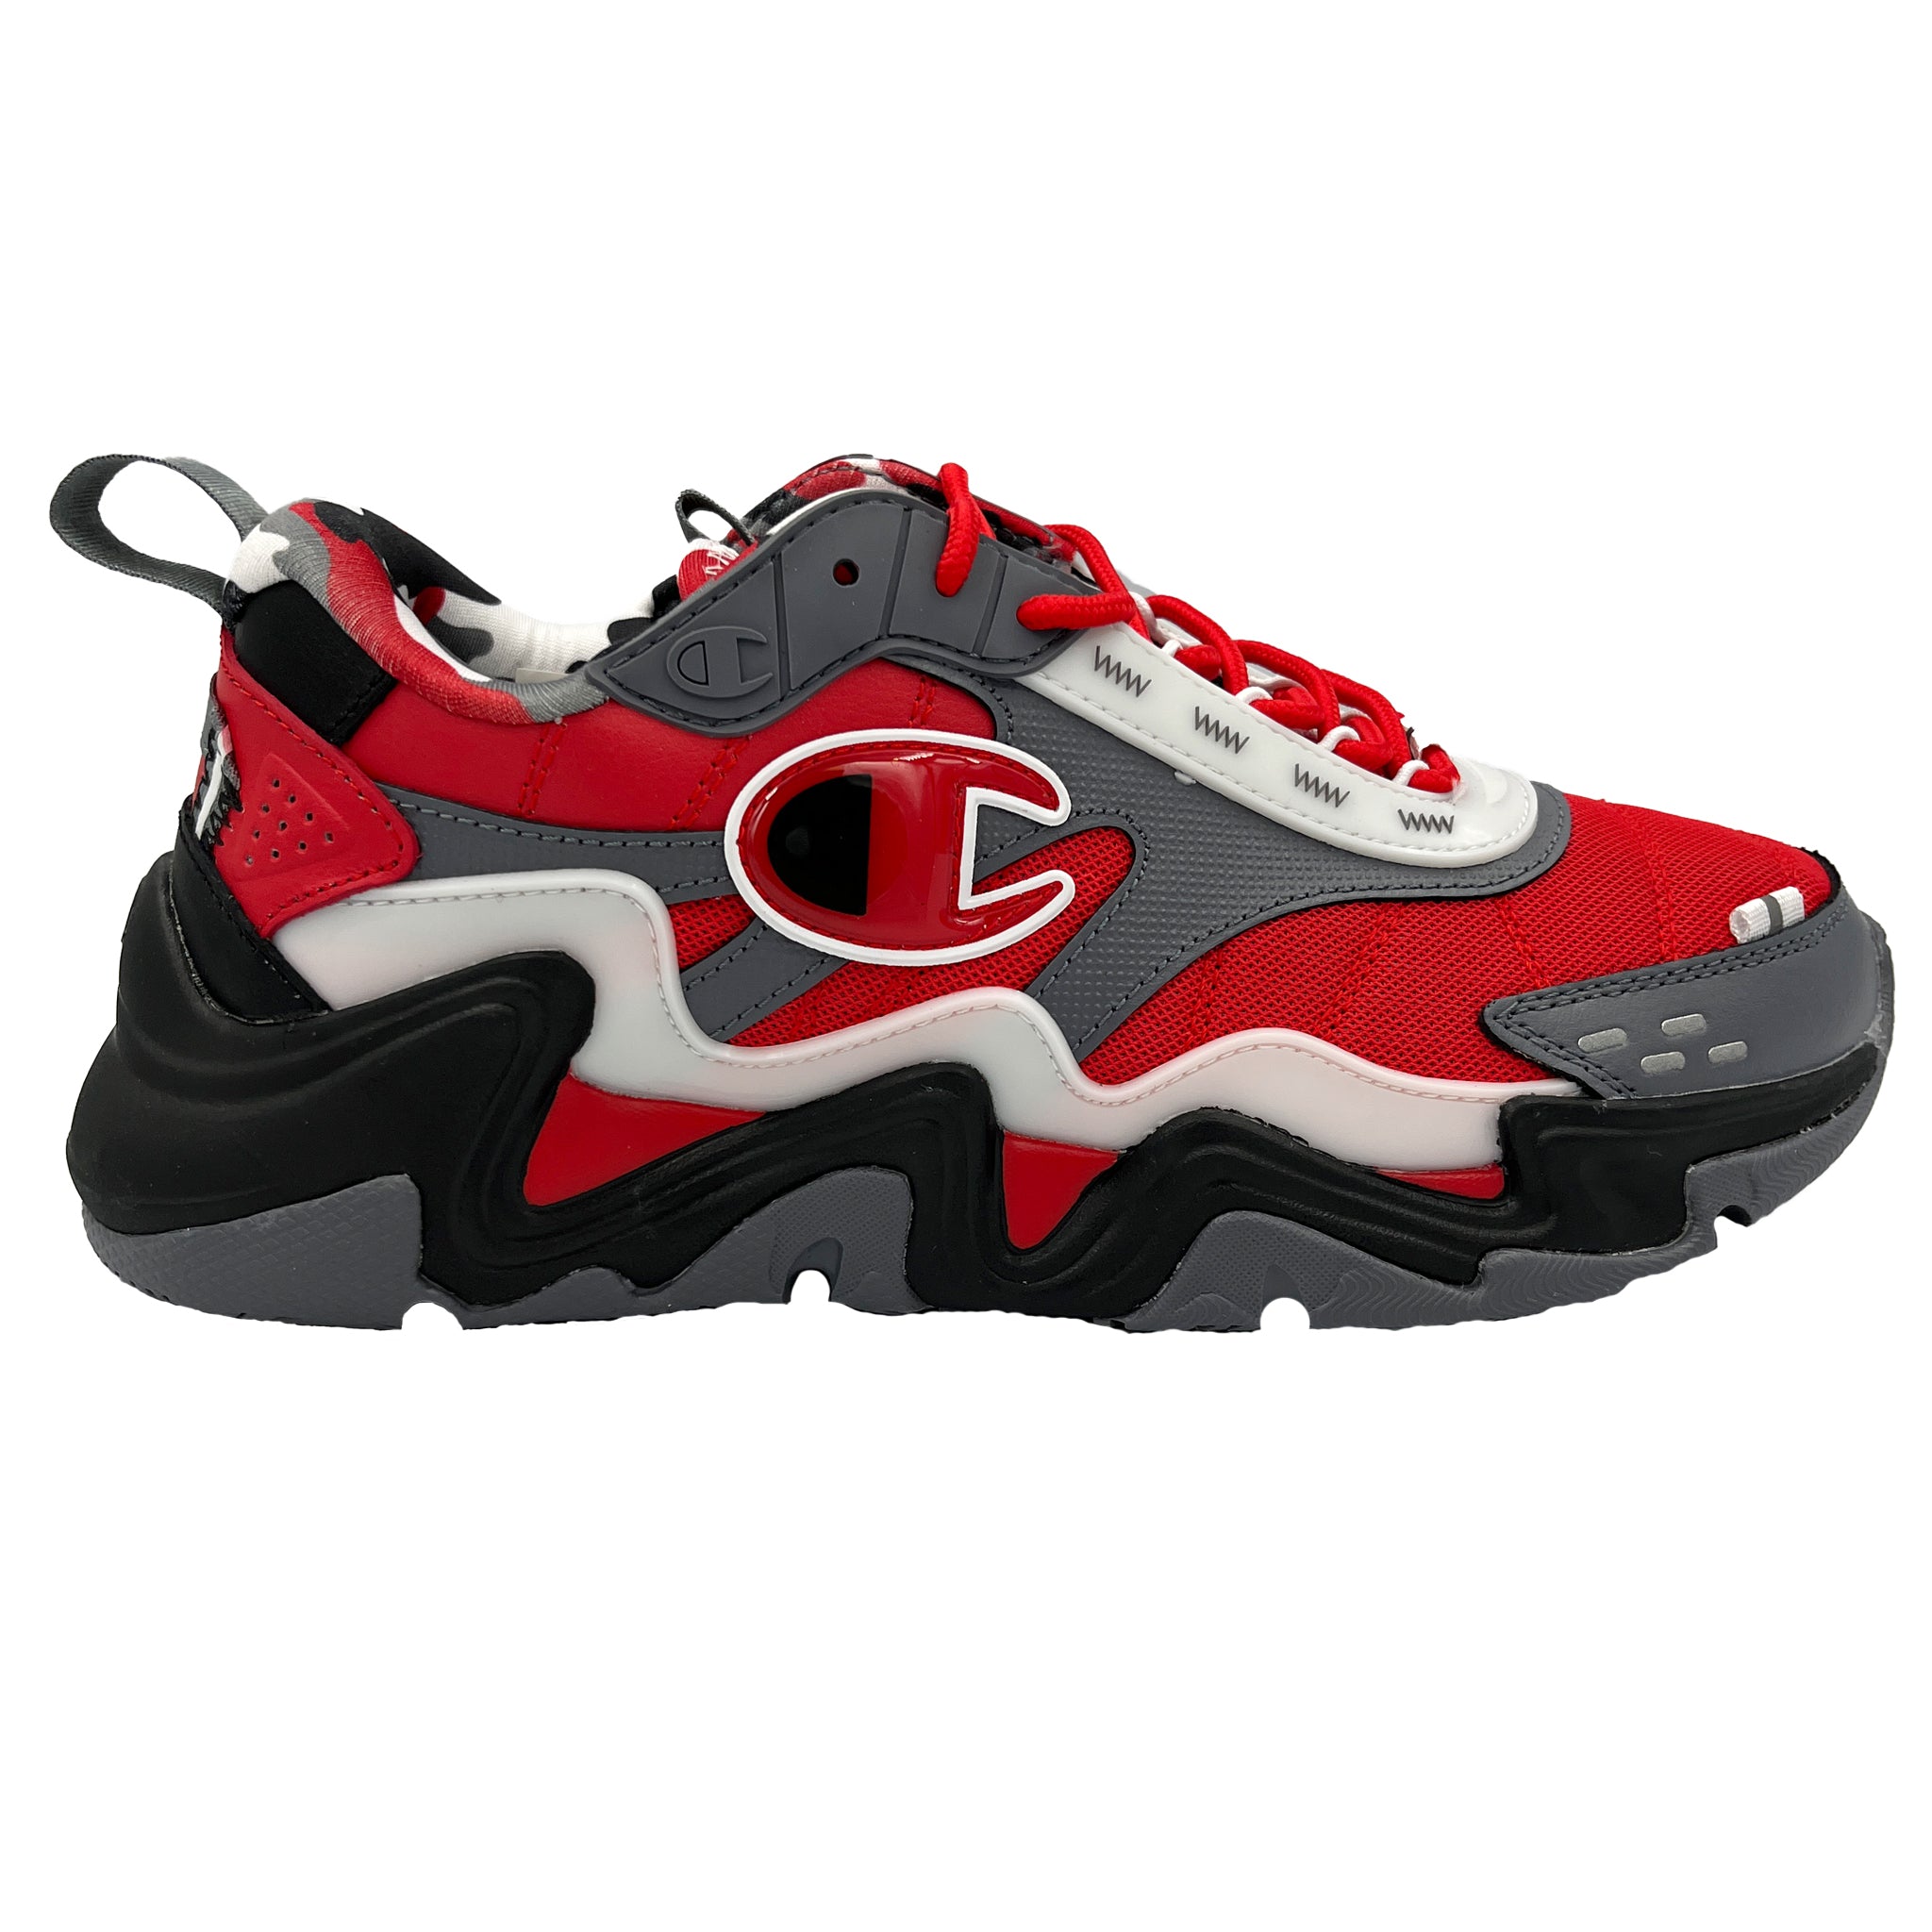 Champion Scarlet/Grey Hyper C Flood Shoes – That and More